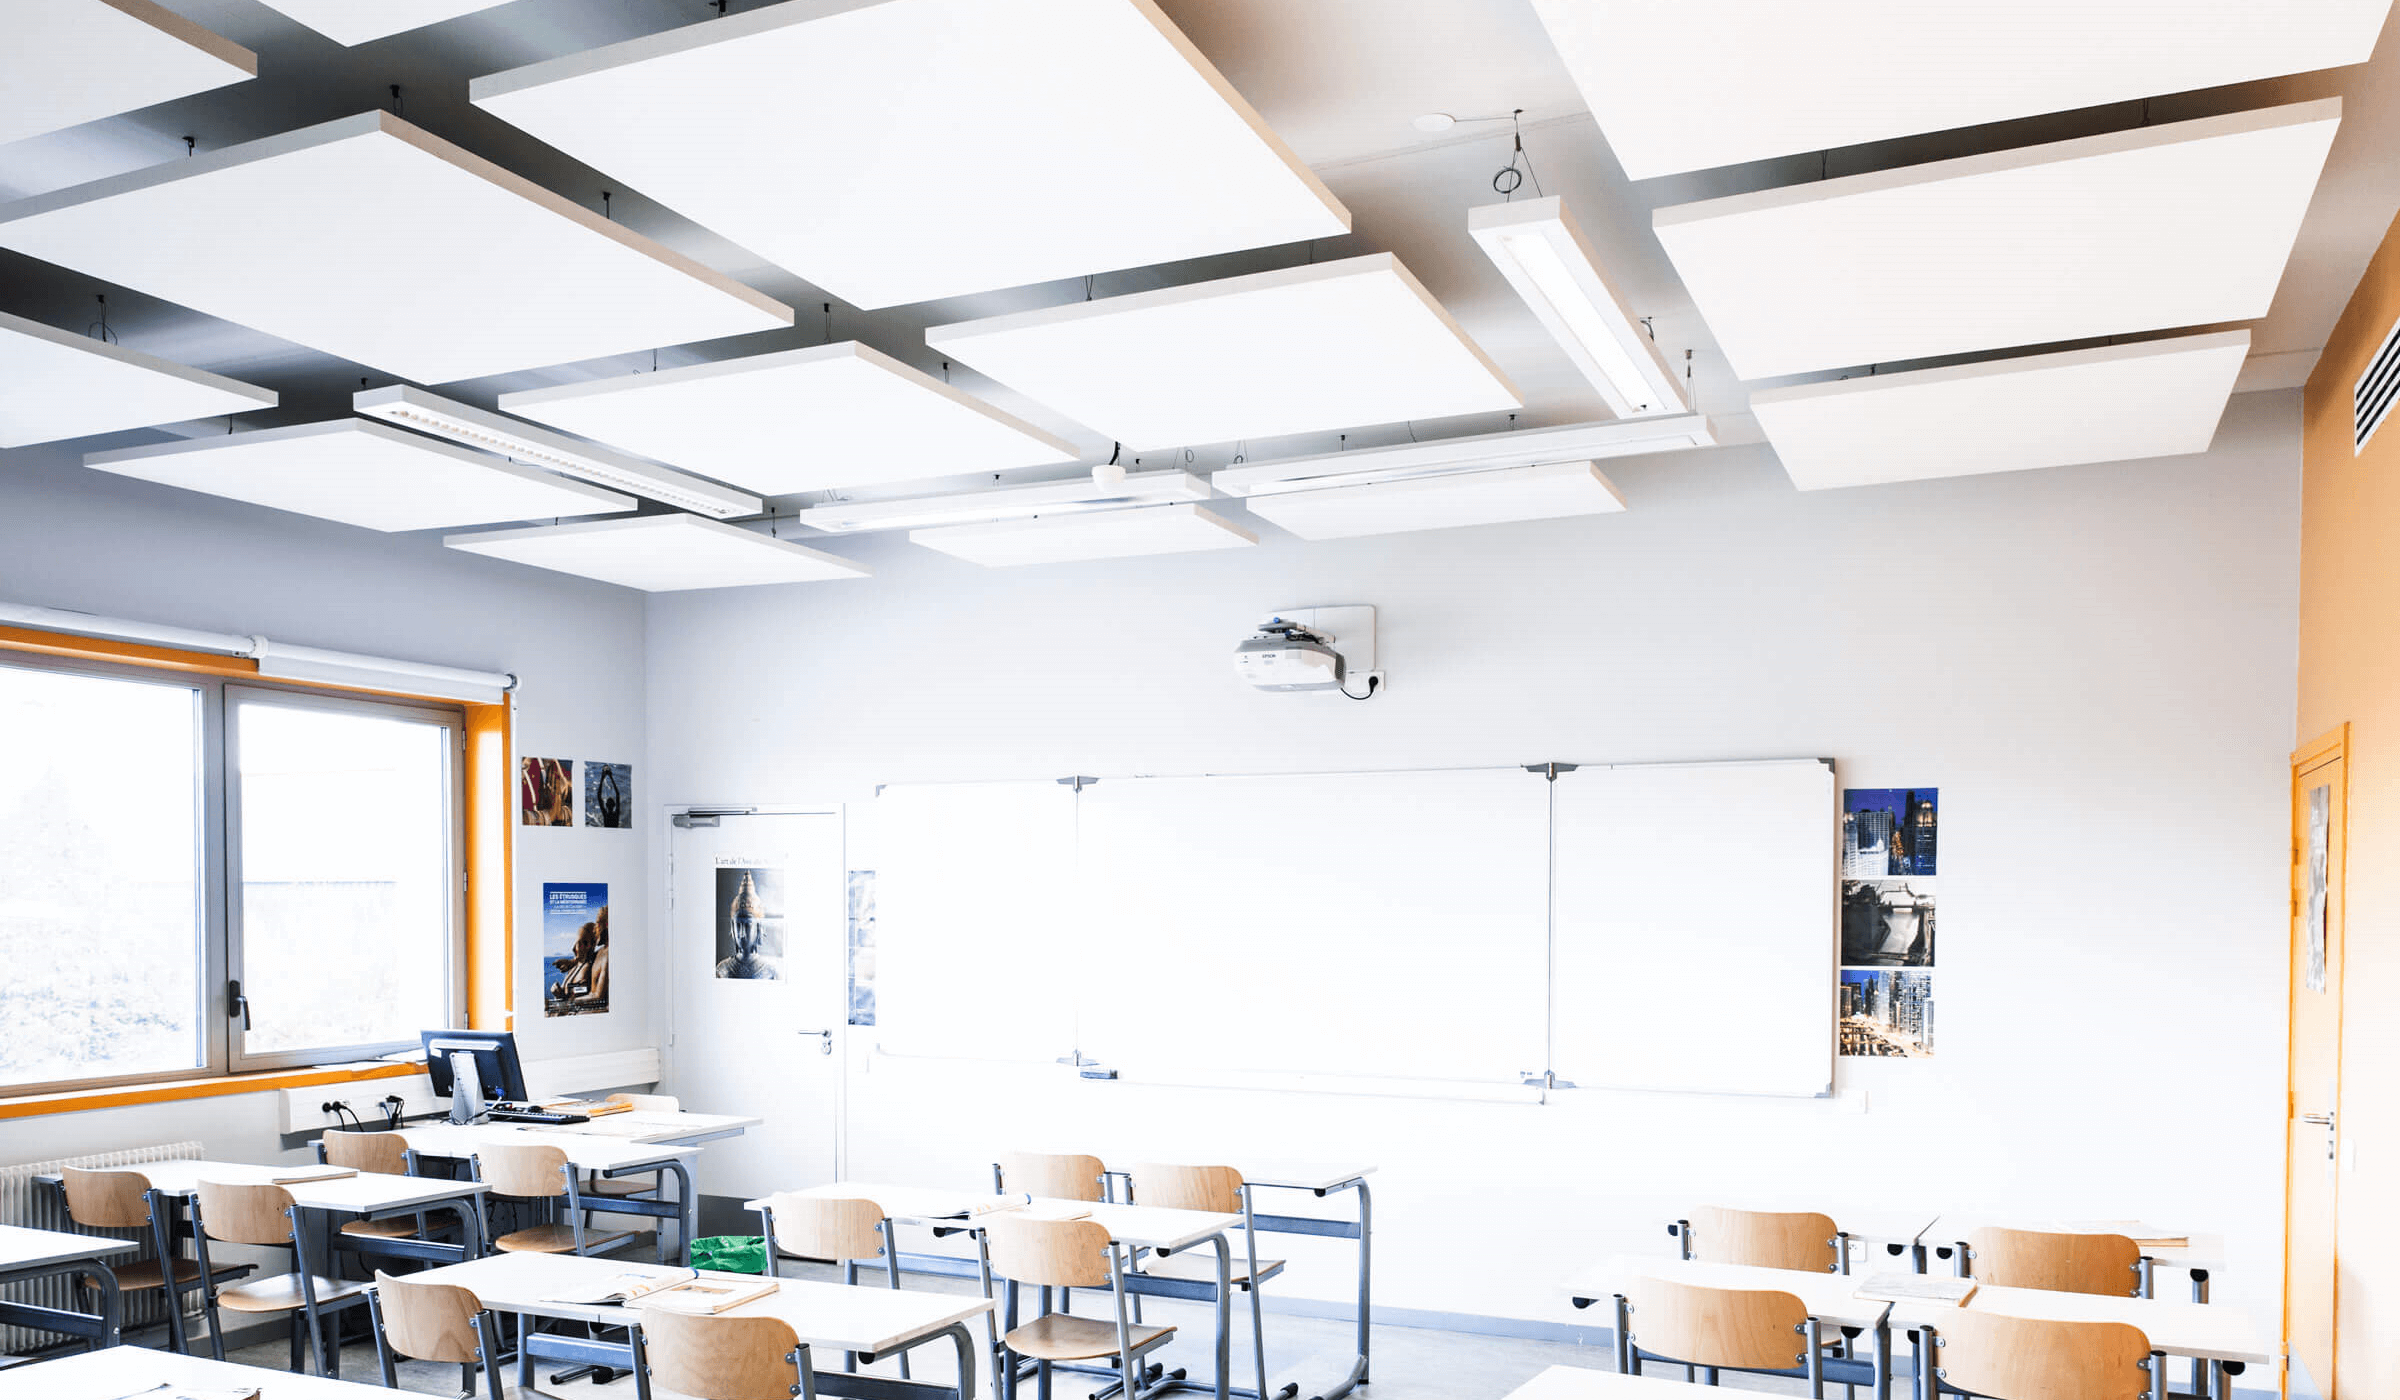 General image of a classroom with Ecophon ceiling tiles